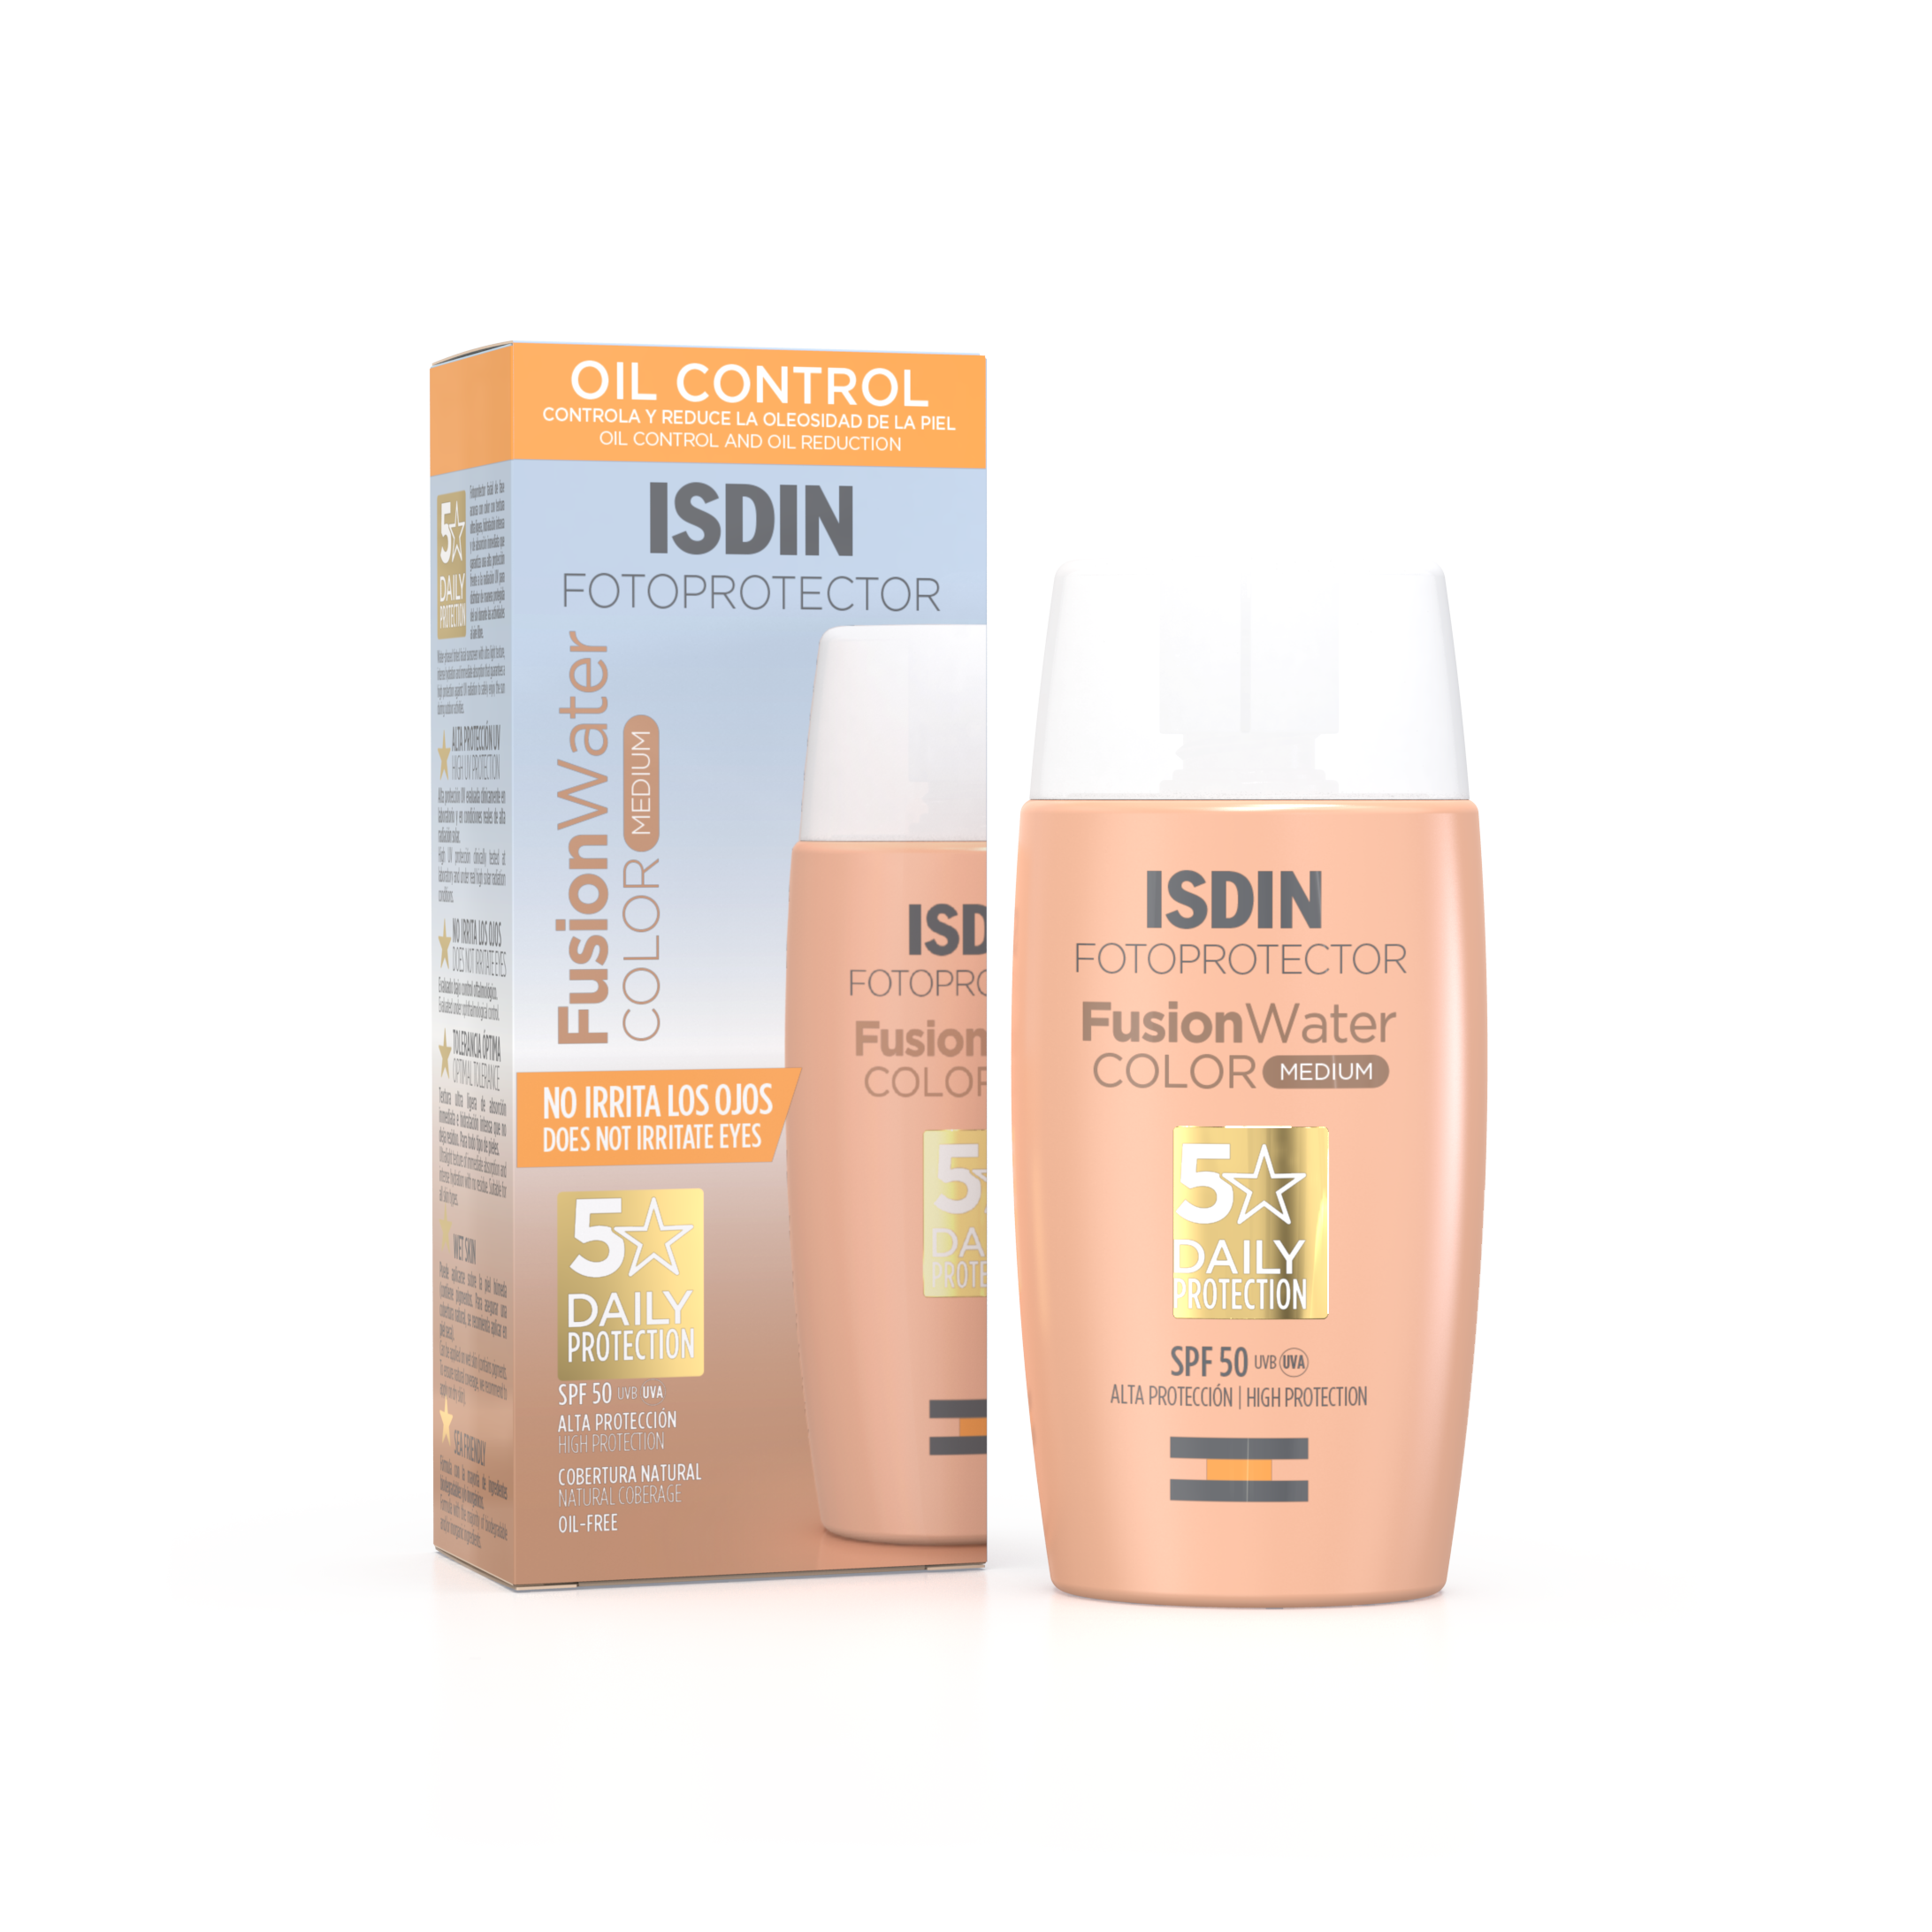 Fotoprotector Isdin Fusion Water Color Medio Oil Control FPS 50+ - Frasco 50 Ml